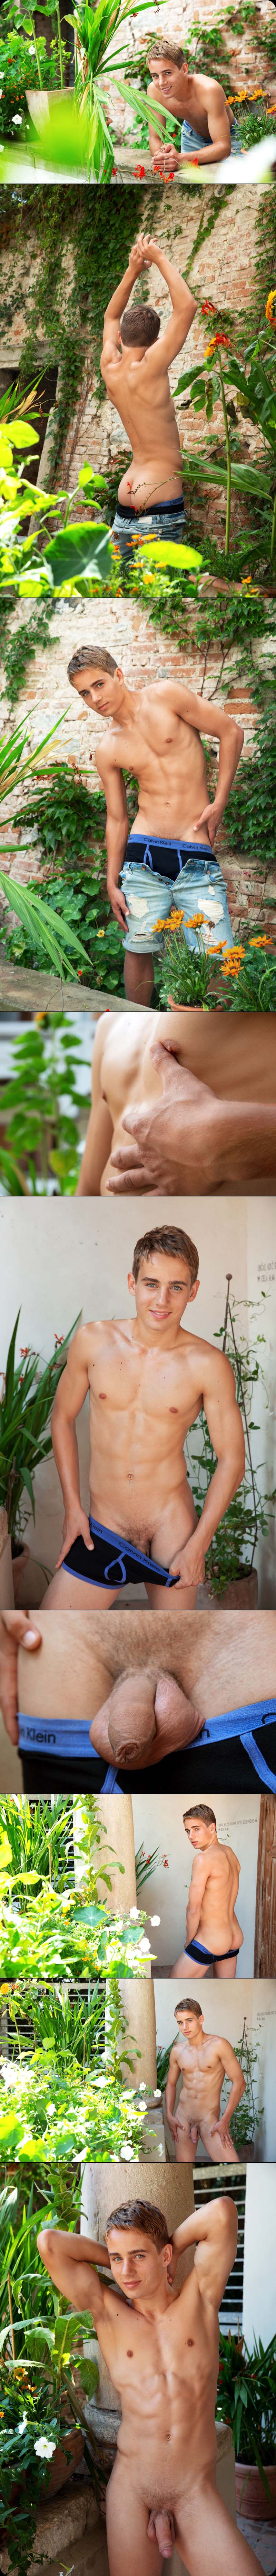 Jerry Hannan (Model of the Week) at BelAmiOnline.com